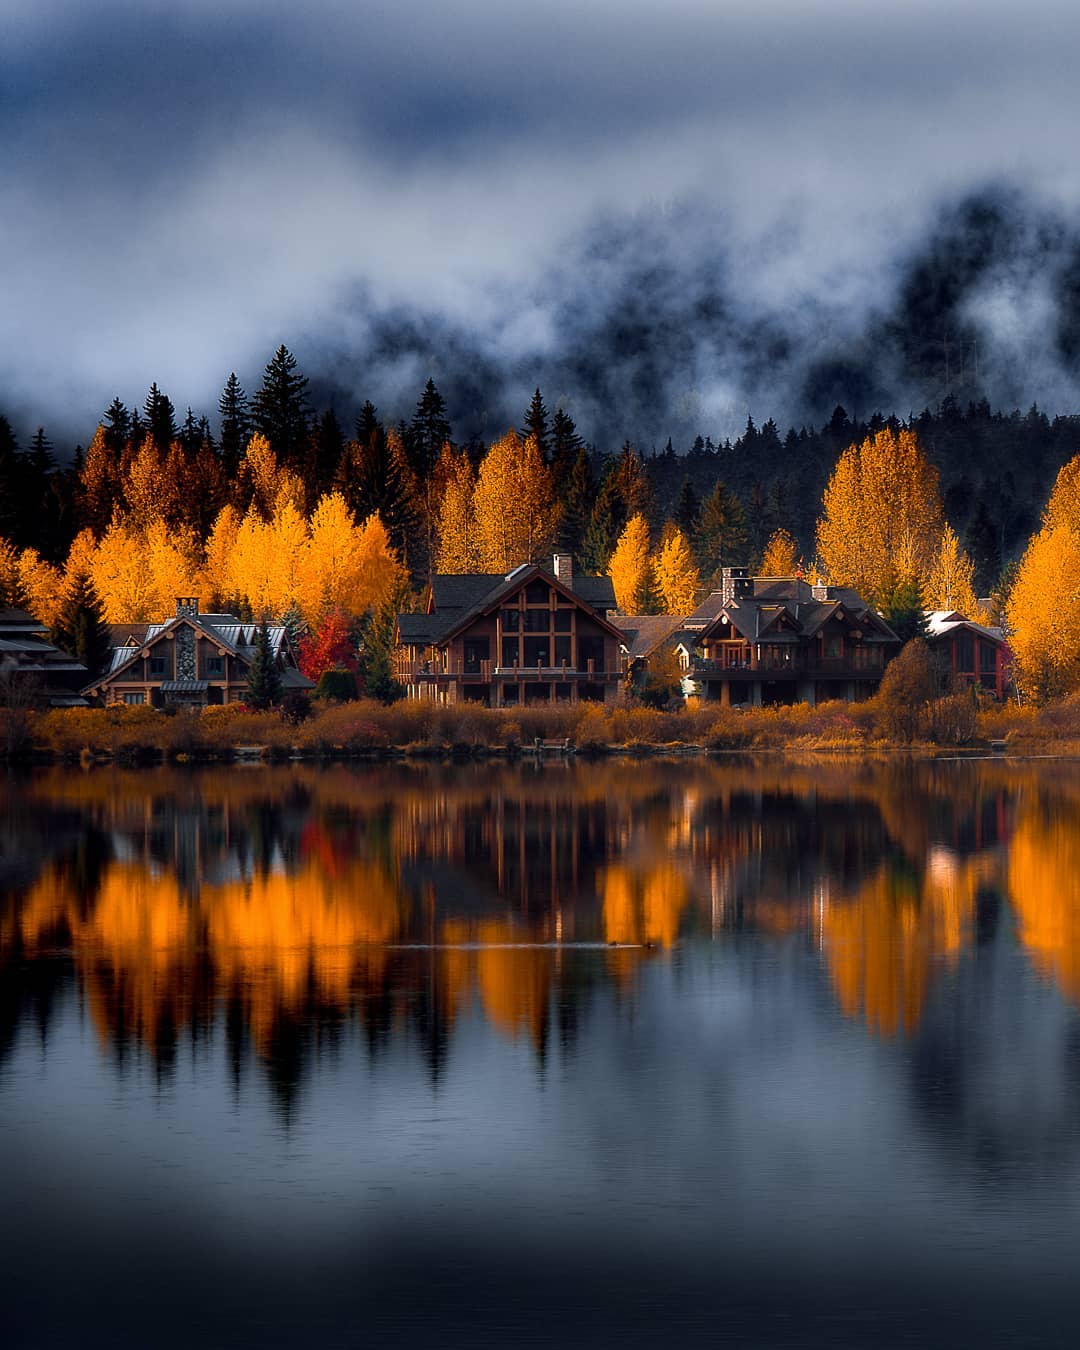 Golden trees dot the shoreline with three houses on a lake